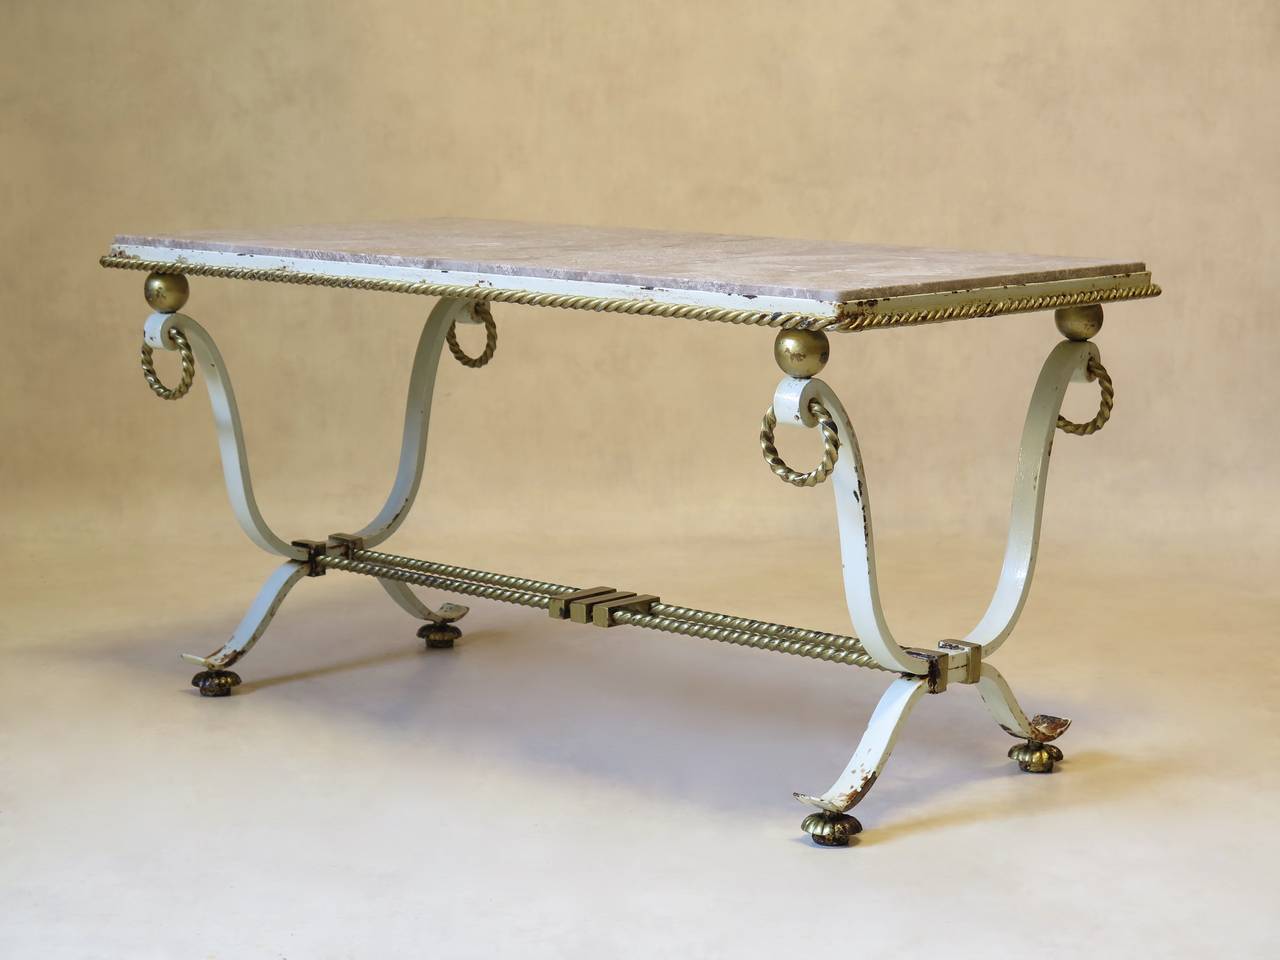 Rectangular coffee table almost certainly by Gilbert Poillerat, in cream and gilt wrought iron. Twisted rope detailing around the original pink or grey marble top. Spheres and hanging ring detail.